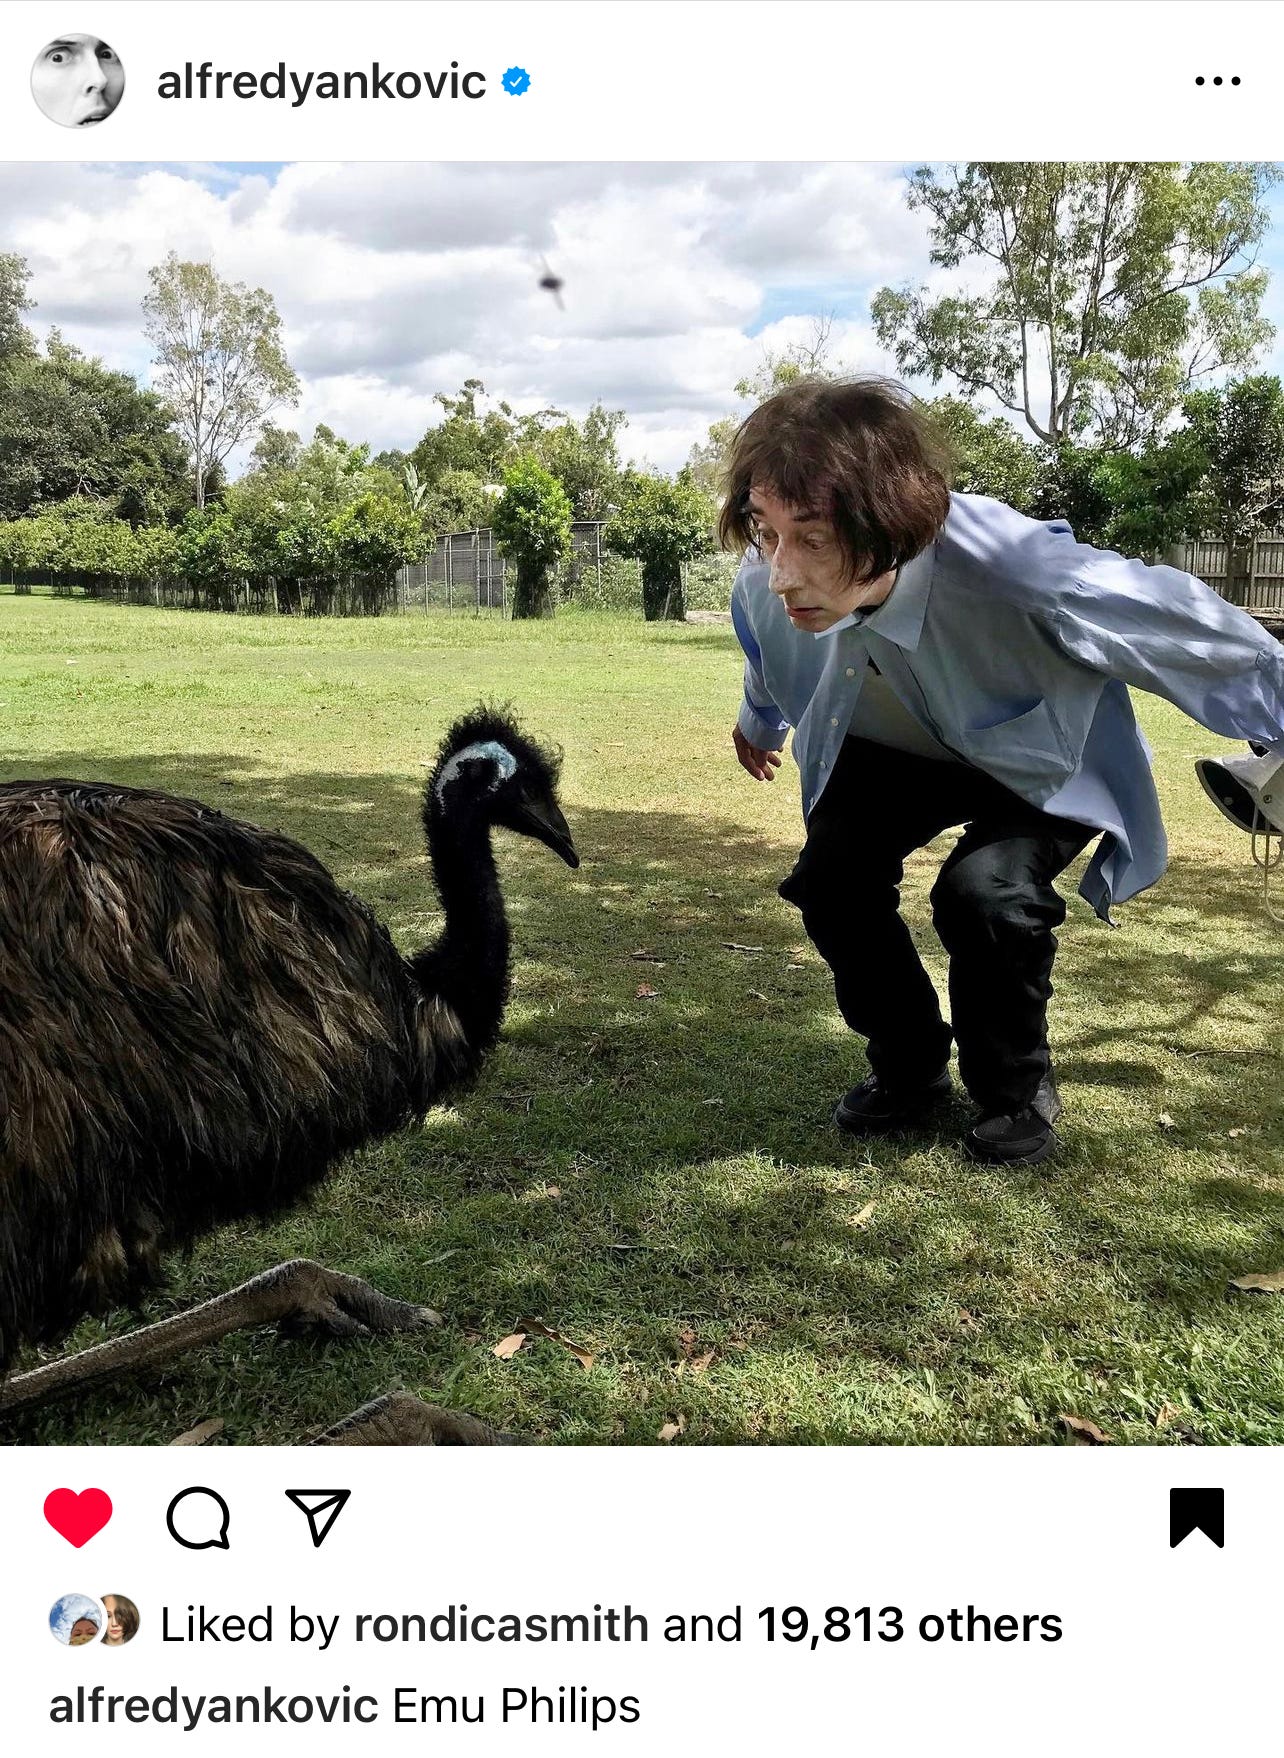 An emu with Emo Phillips bending down to bow in greeting, captioned "Emu Phillips."